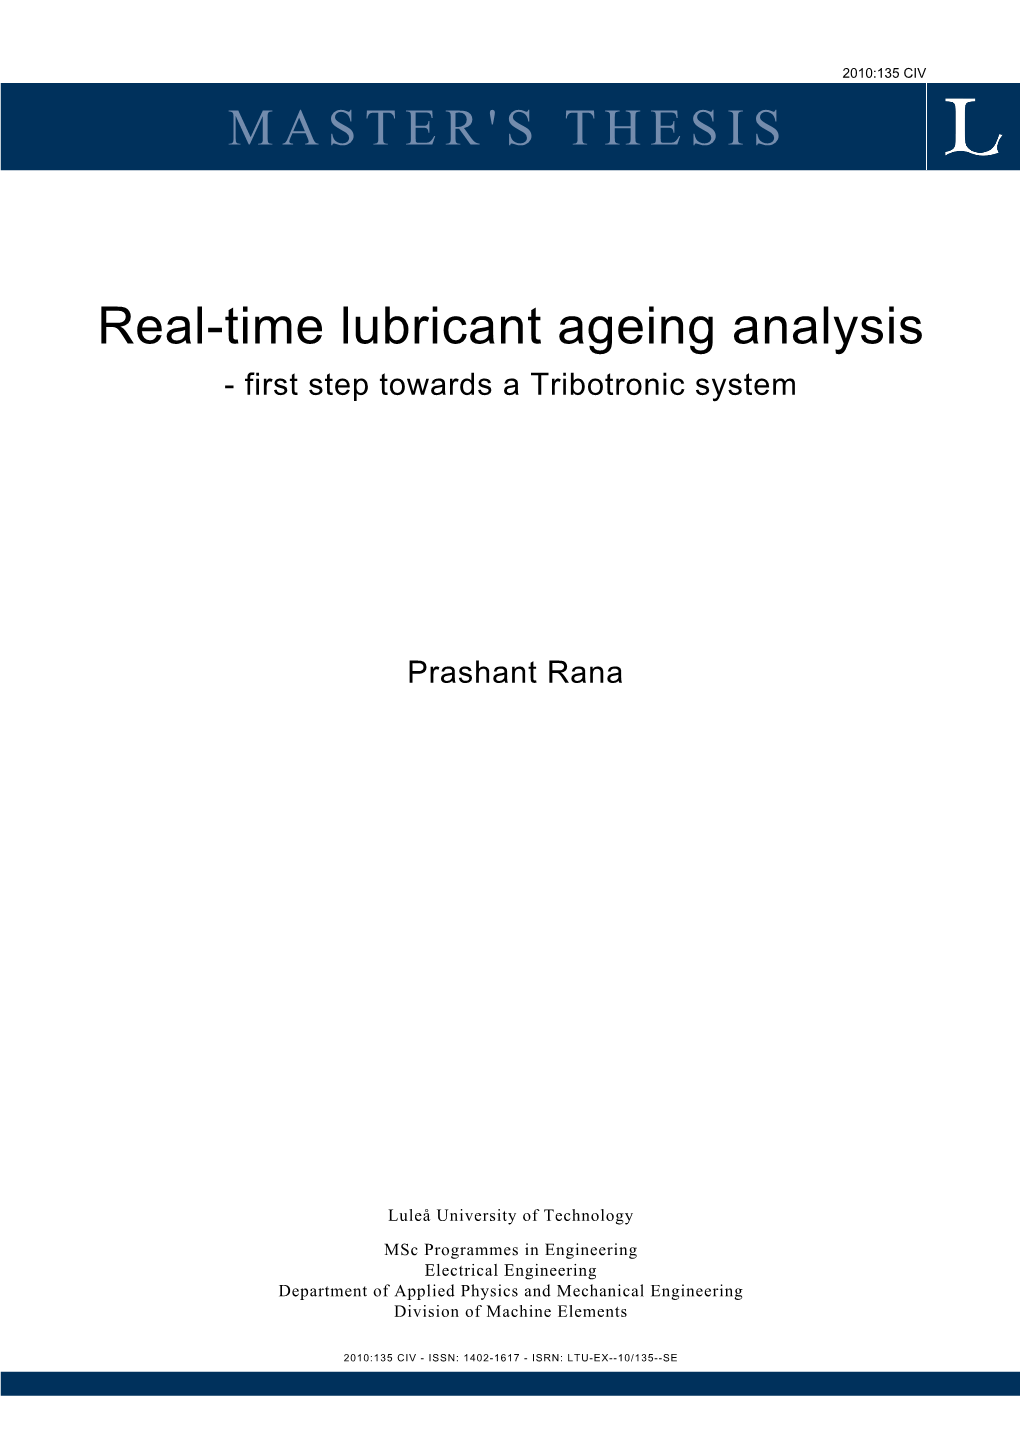 MASTER's THESIS Real-Time Lubricant Ageing Analysis